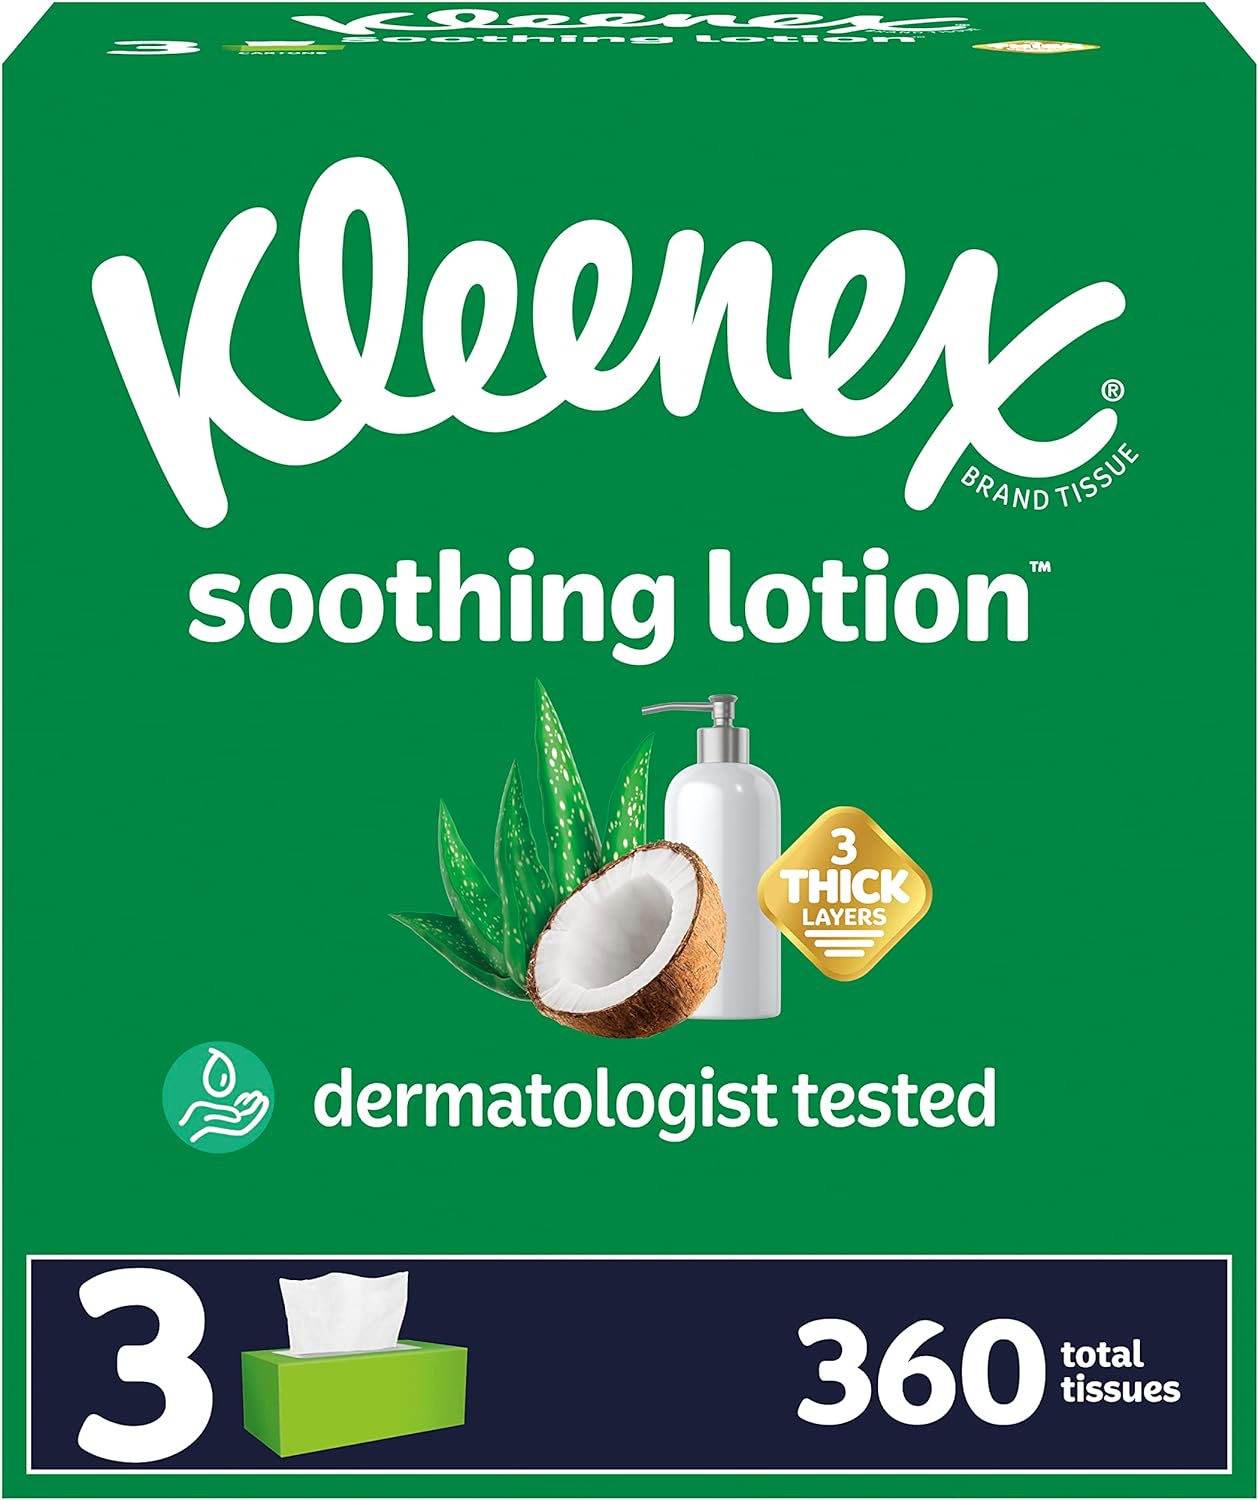 3-Pack 120-Count Kleenex 3-Layer Facial Tissues (Soothing Lotion or Ultra Soft) $4.74 w/ S&S + Free Shipping w/ Prime or on orders over $35